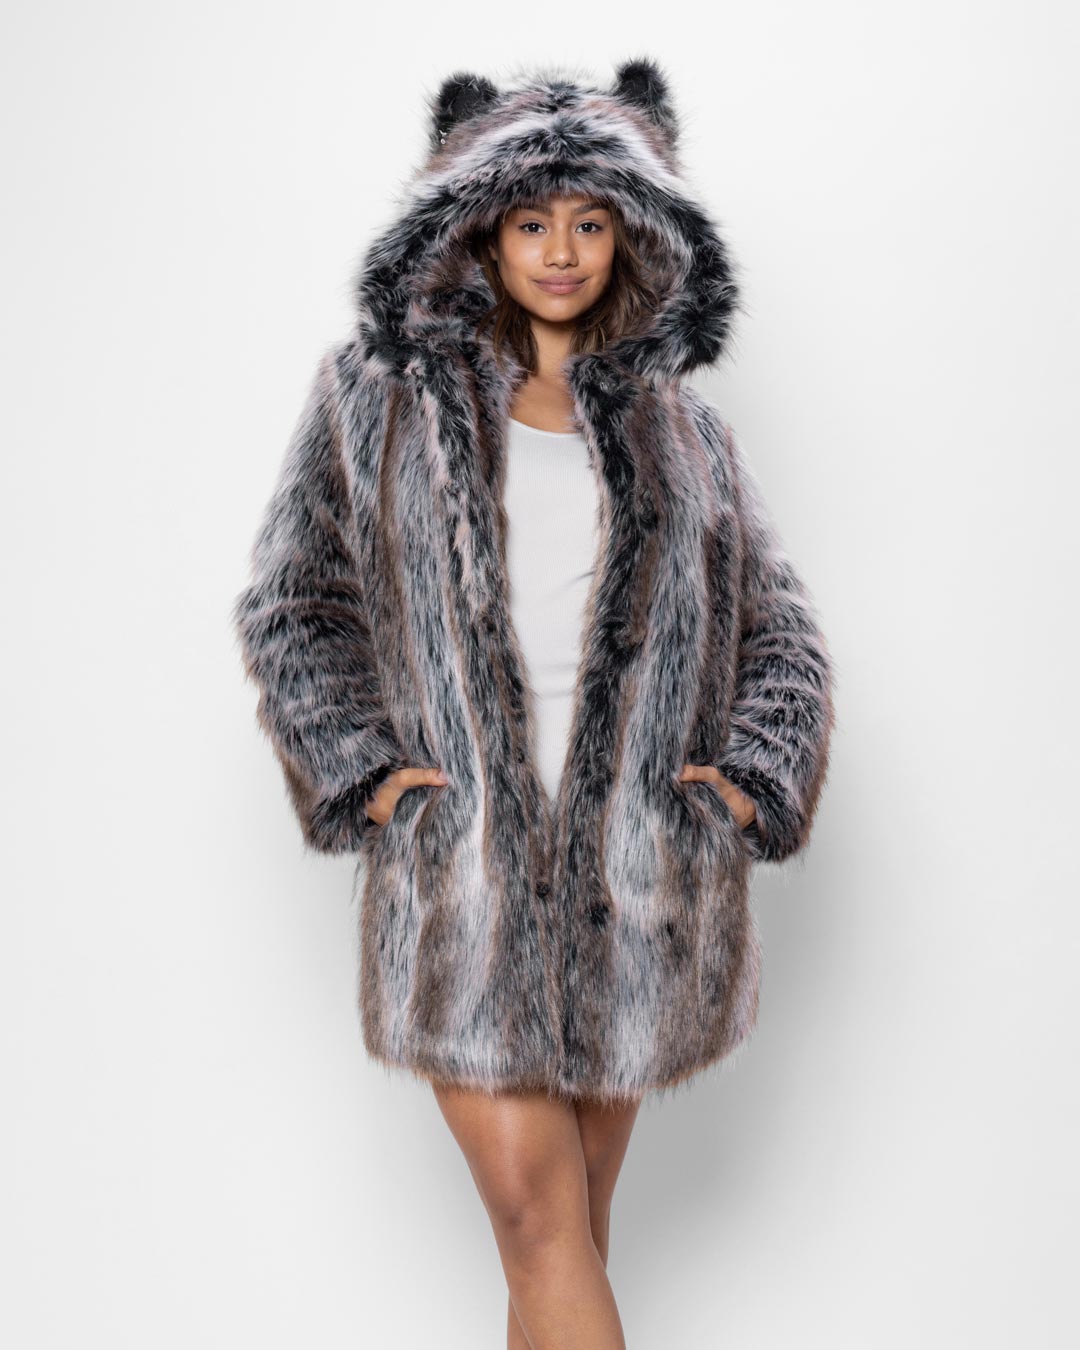 Female model standing in front of a white background wearing a white shirt and a grey faux fur coat with a hood and animal ears.